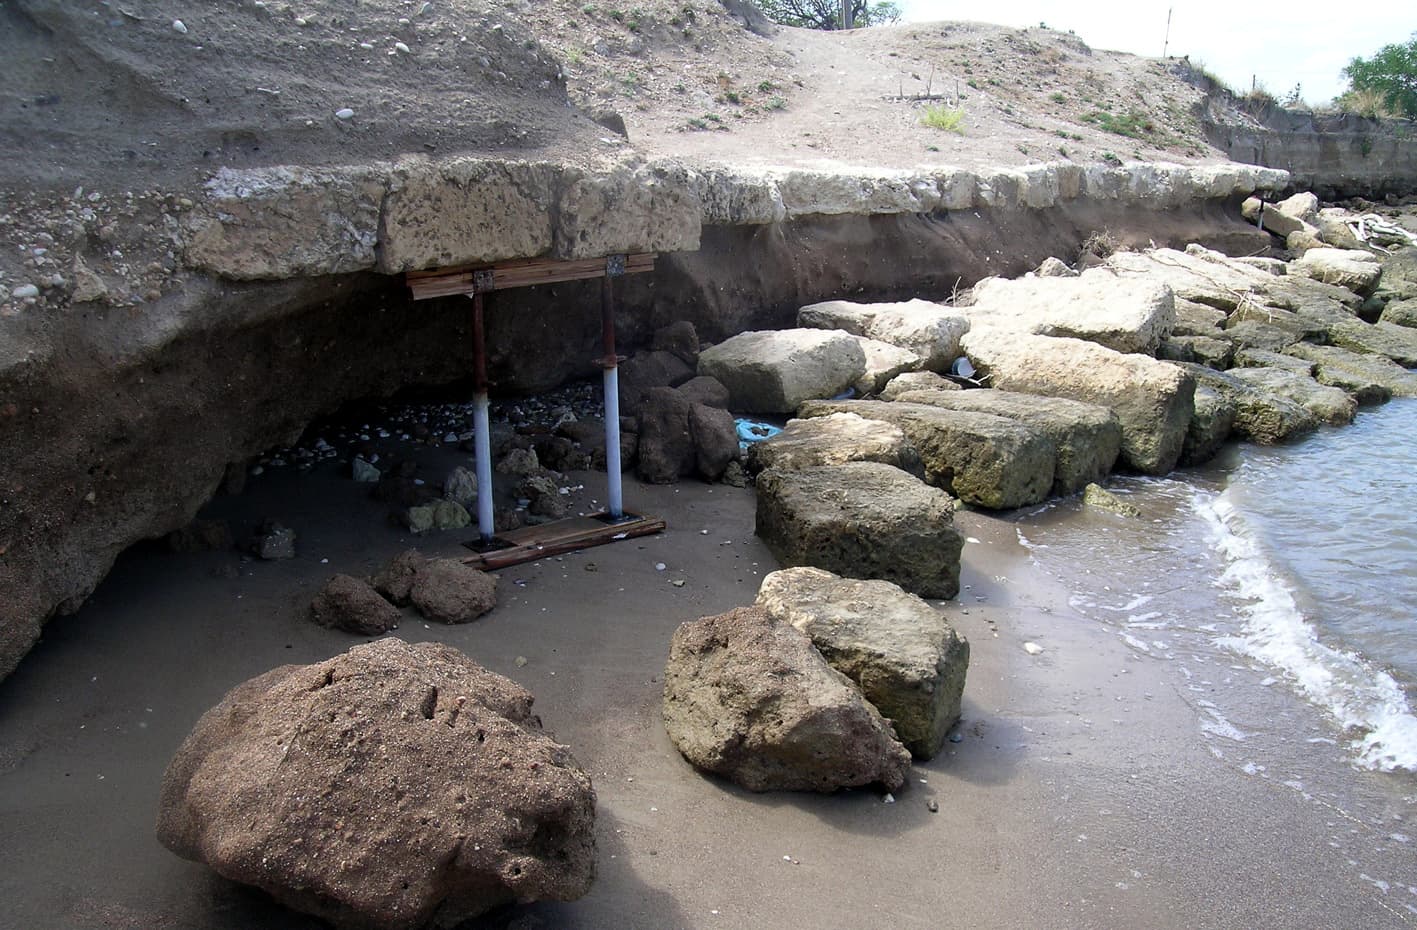 The Diolkos near the canal is under threat: the continuous swell undermines its foundation.